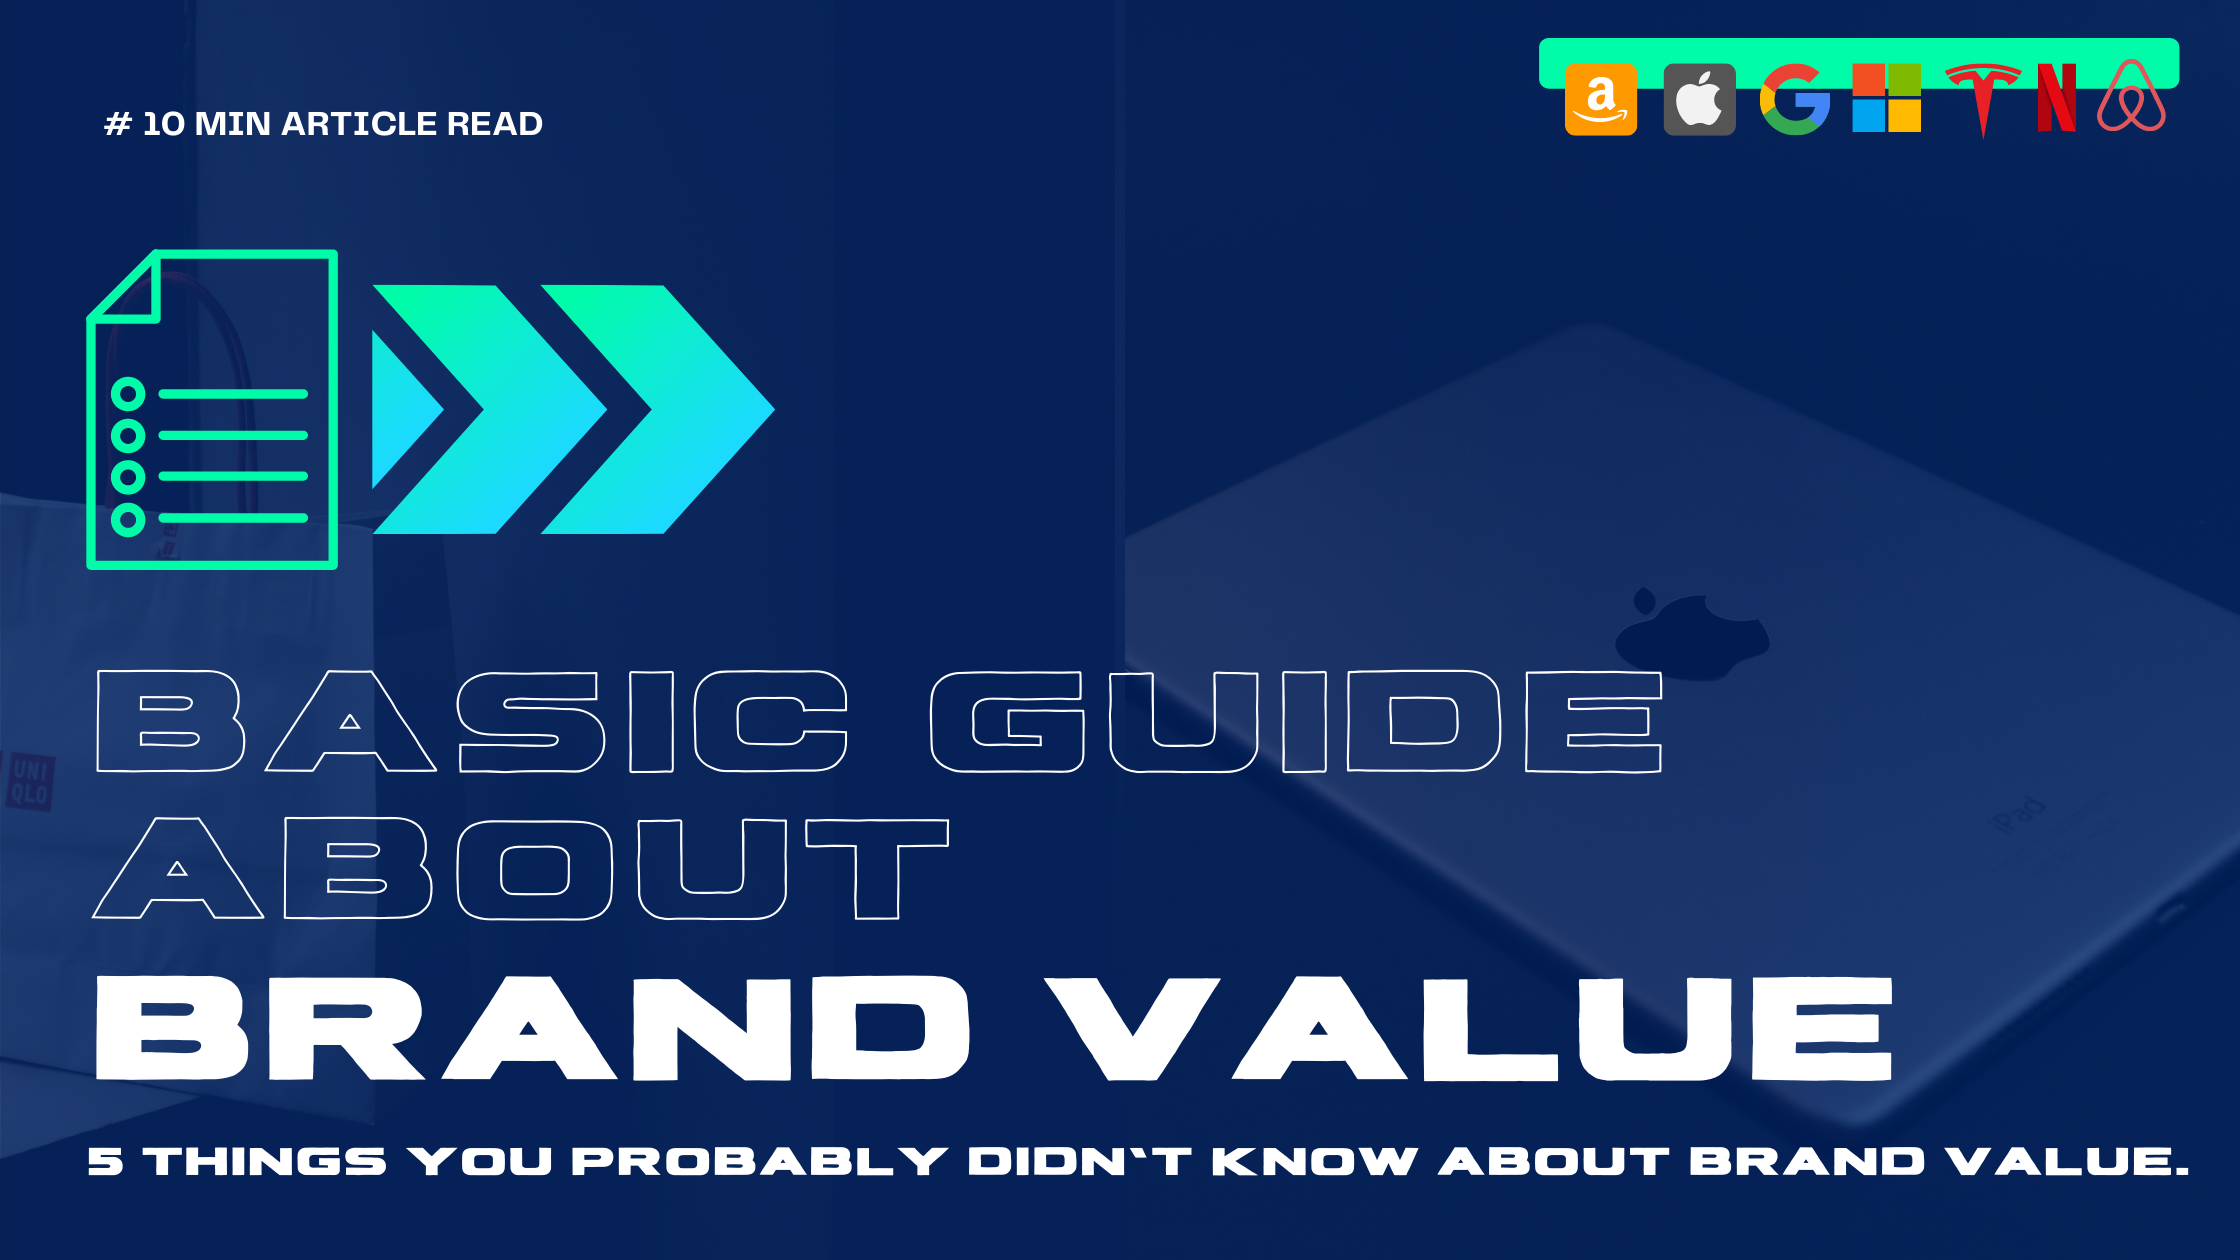 5 Things You Probably Didn't Know About Brand Value